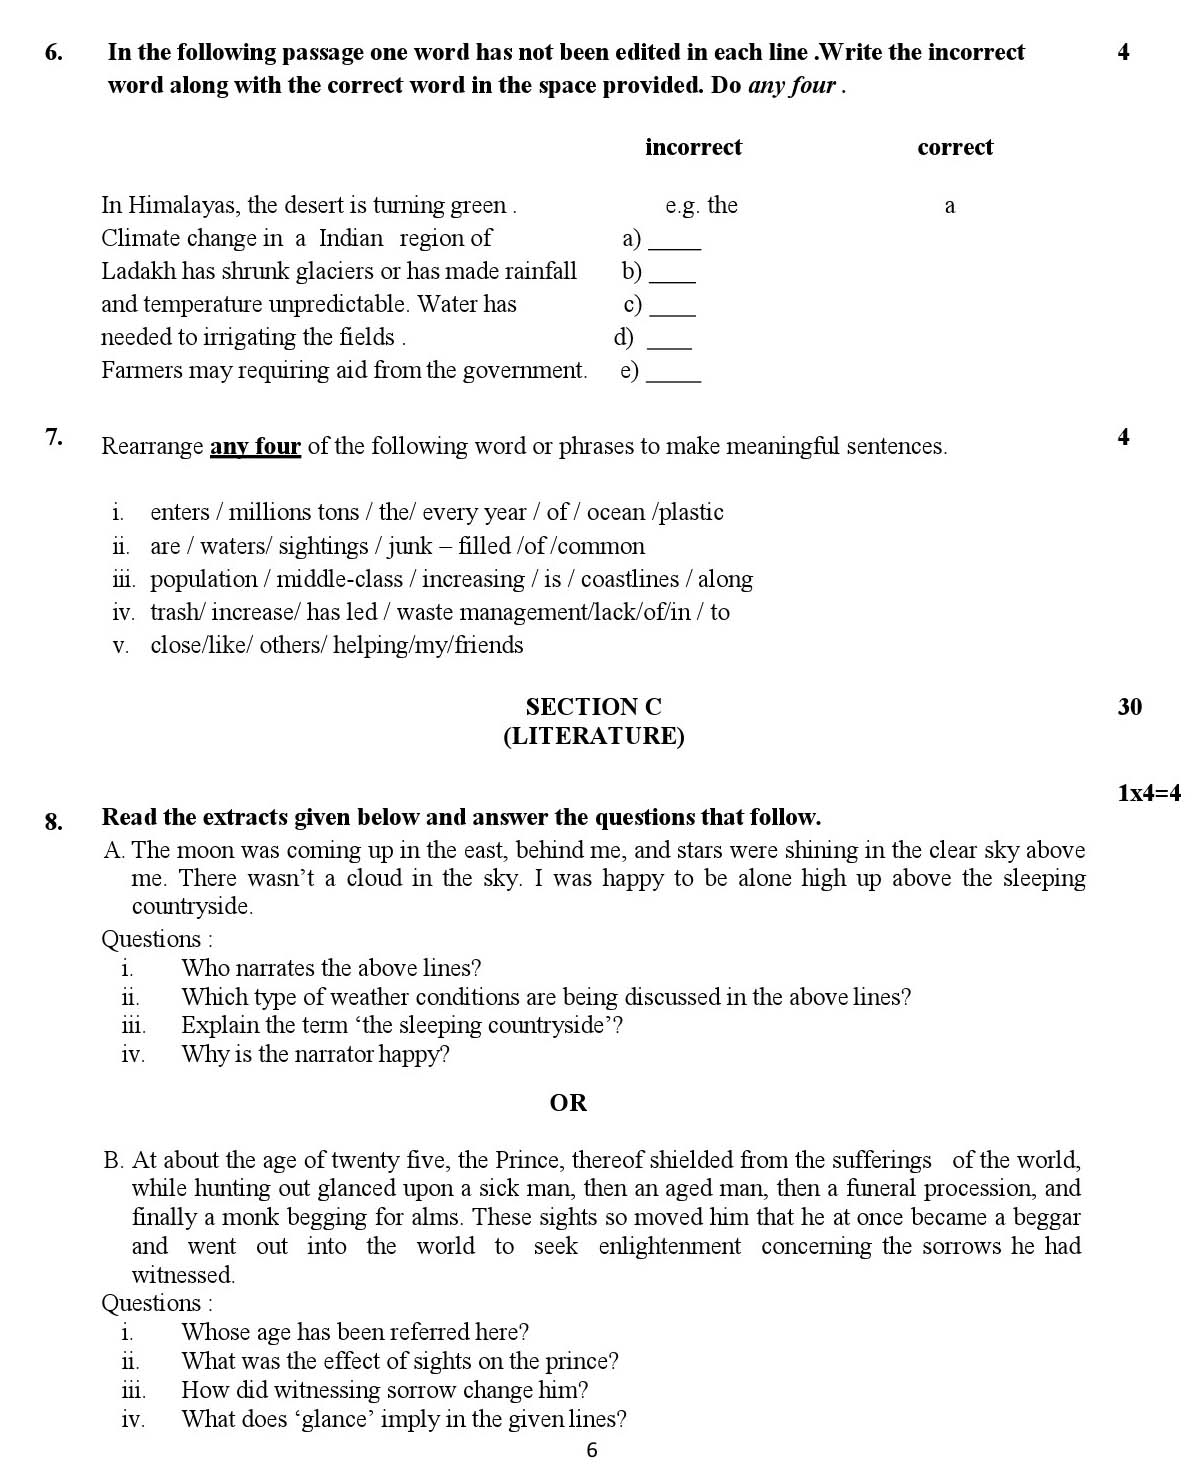 English Language and Literature CBSE Class X Sample Question Paper 2018-19 - Image 6